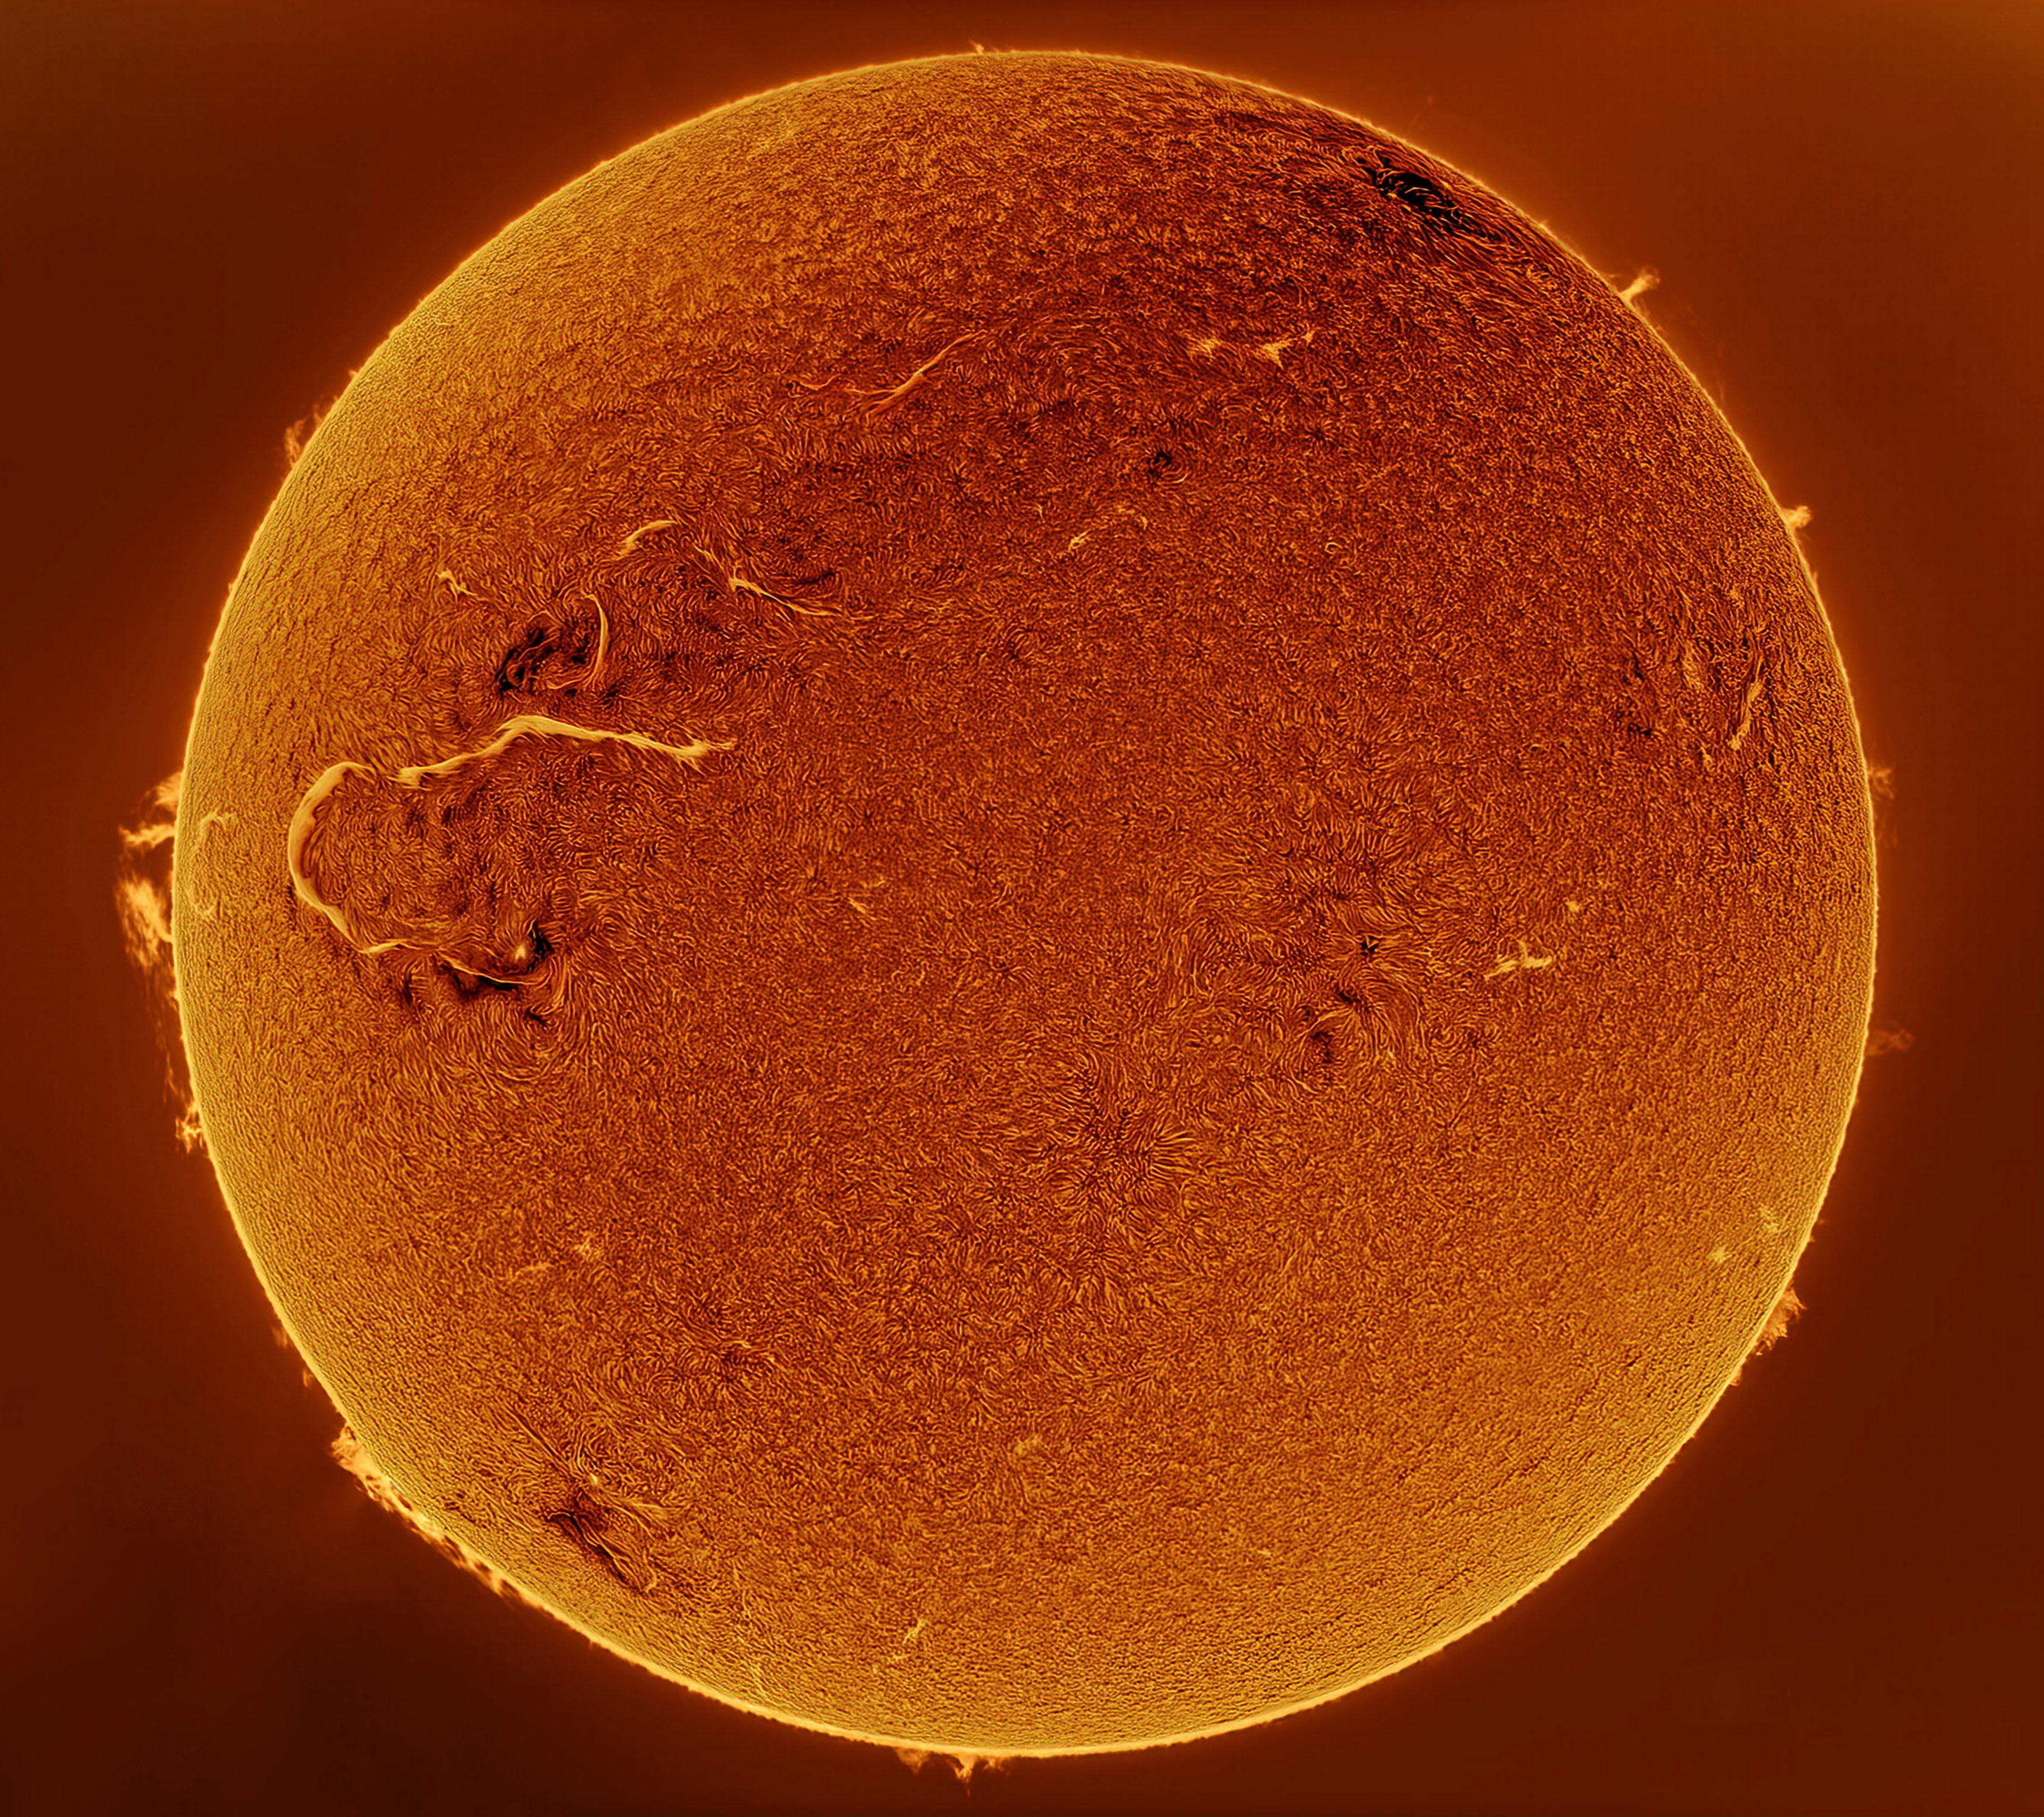 The Sun, with a large solar flare on its left side. (Image: Mehmet Ergün)